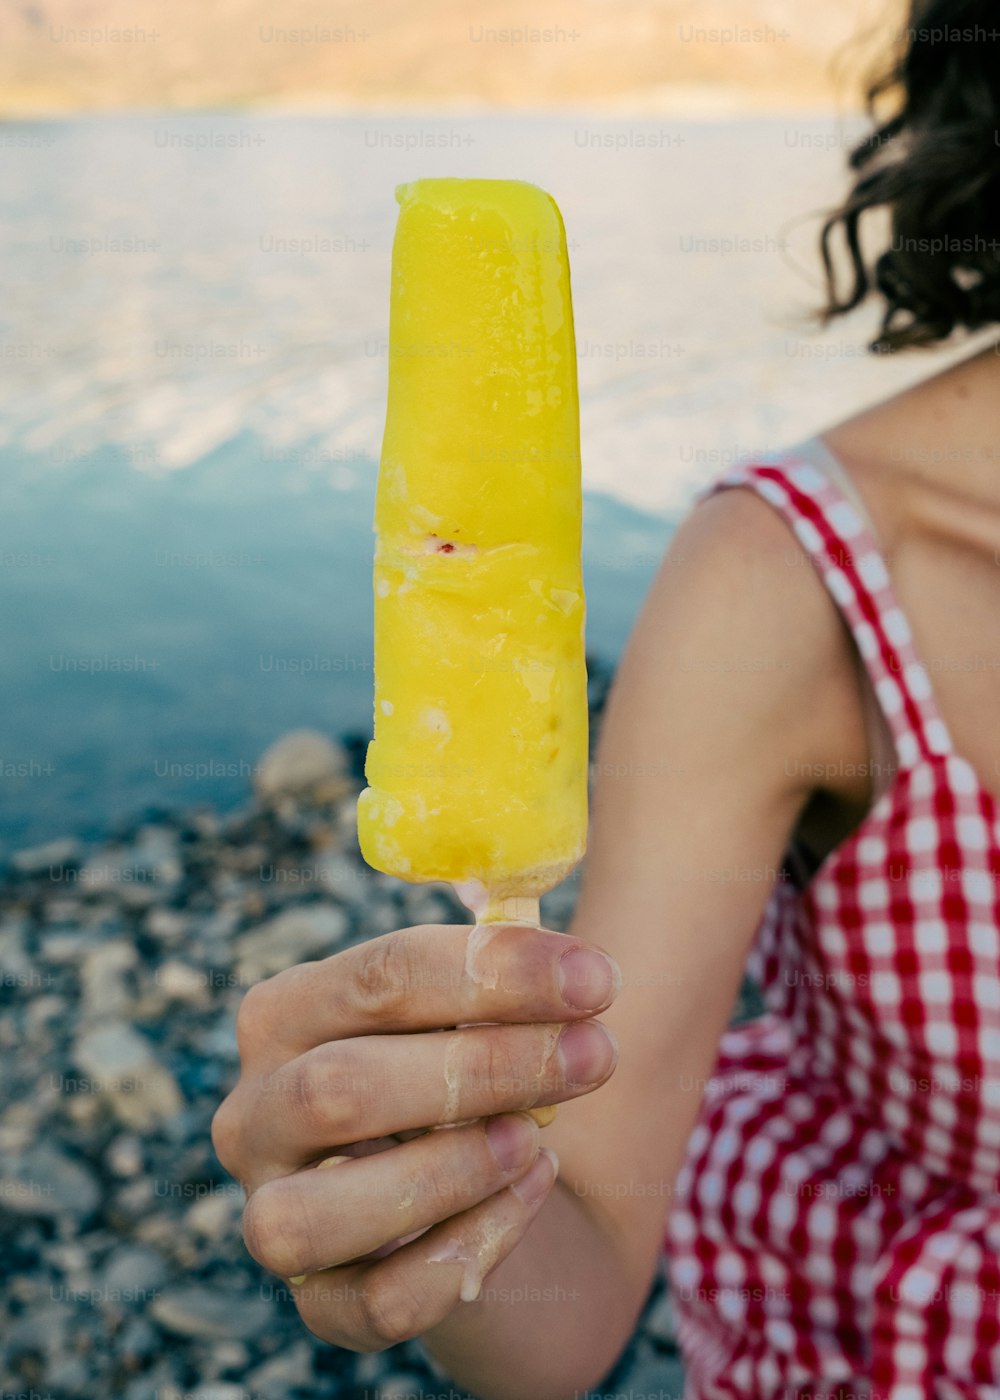 a woman in a red and white checkered dress holding a yellow popsicle